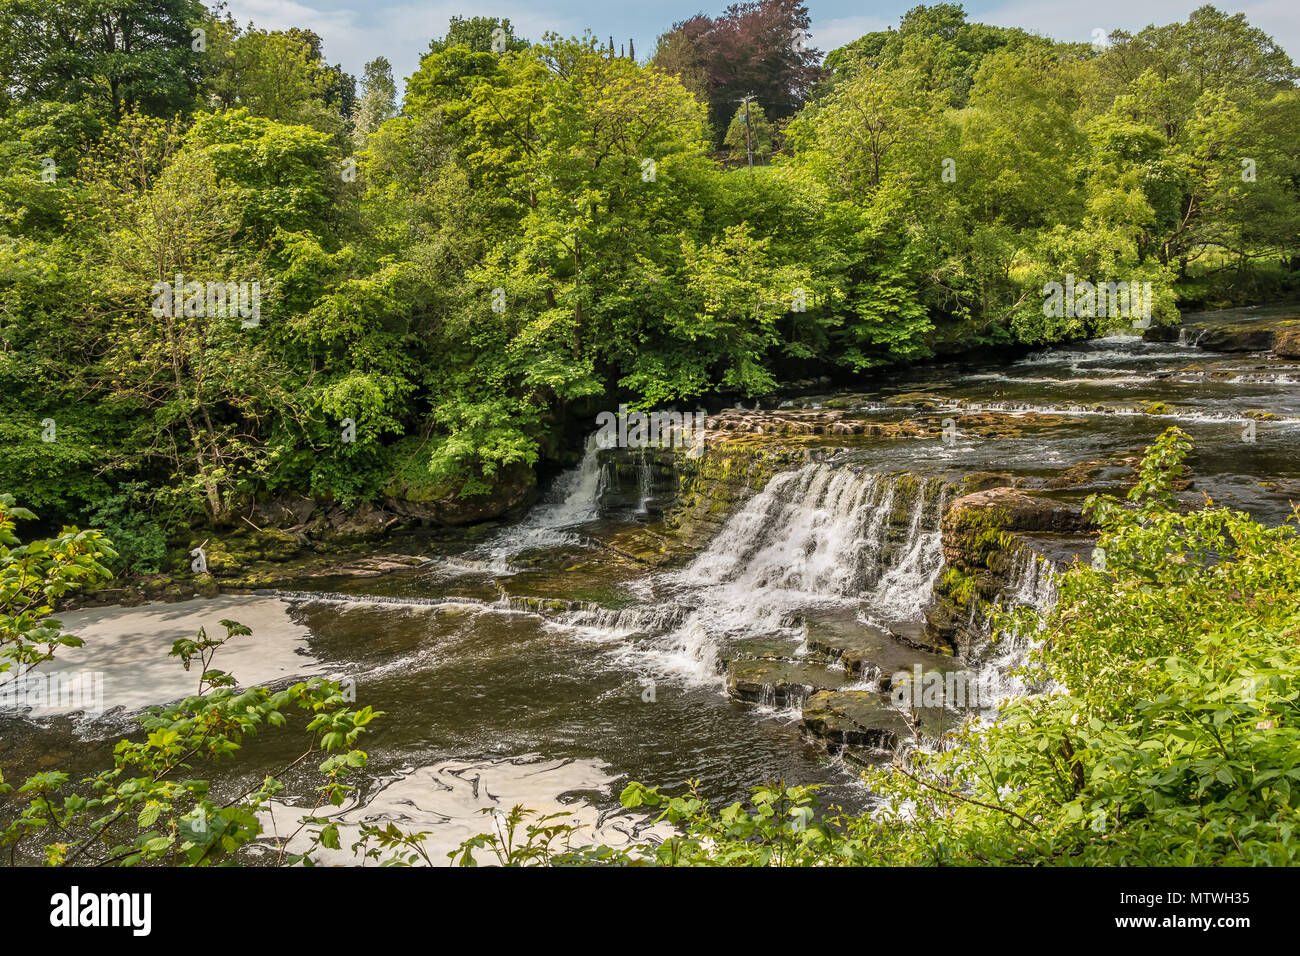 Middle Falls, Aysgarth, Wensleydale, Yorkshire Dales National Park, UK in late spring with very low water level Stock Photo